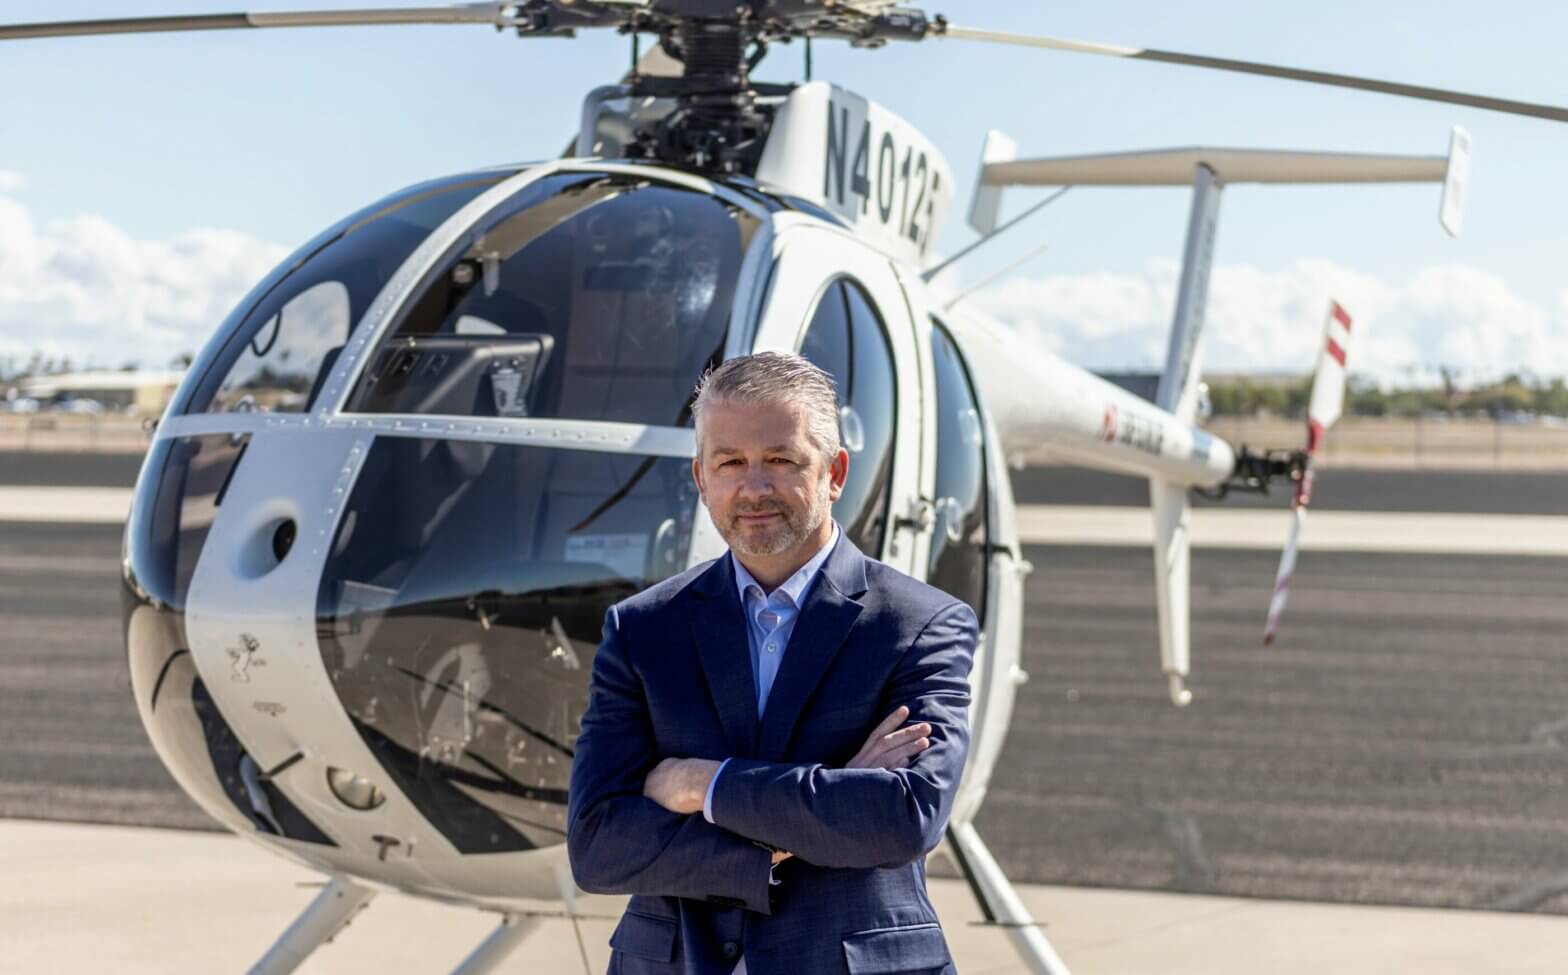 Ryan Weeks named president of MD Helicopters